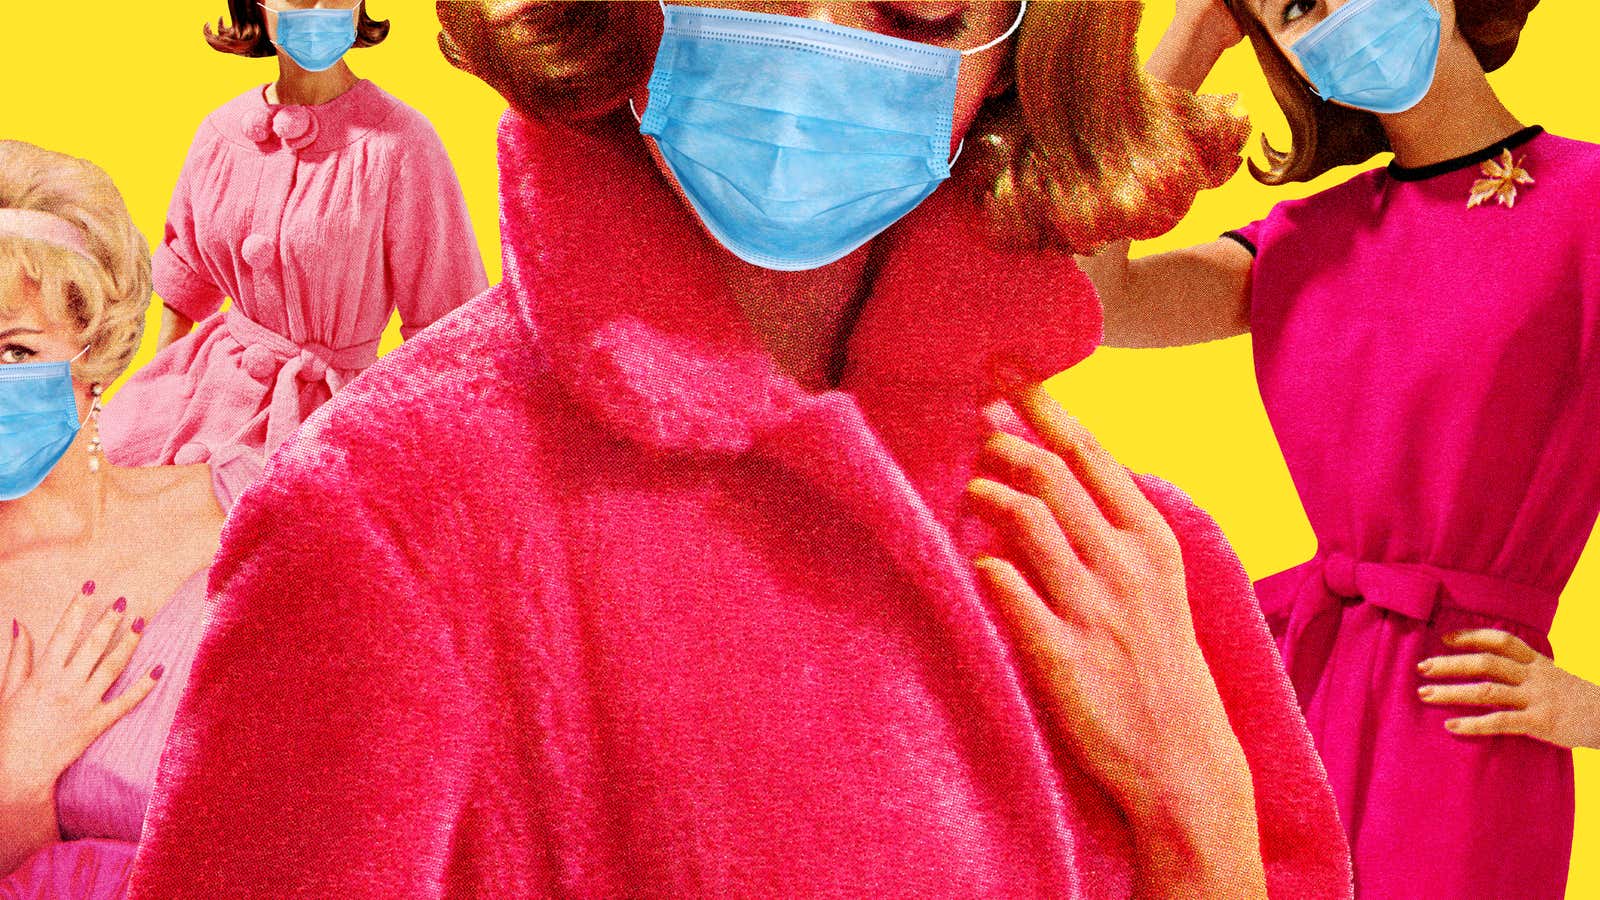 How the Fashionable Face Mask Became a Symbol of Class